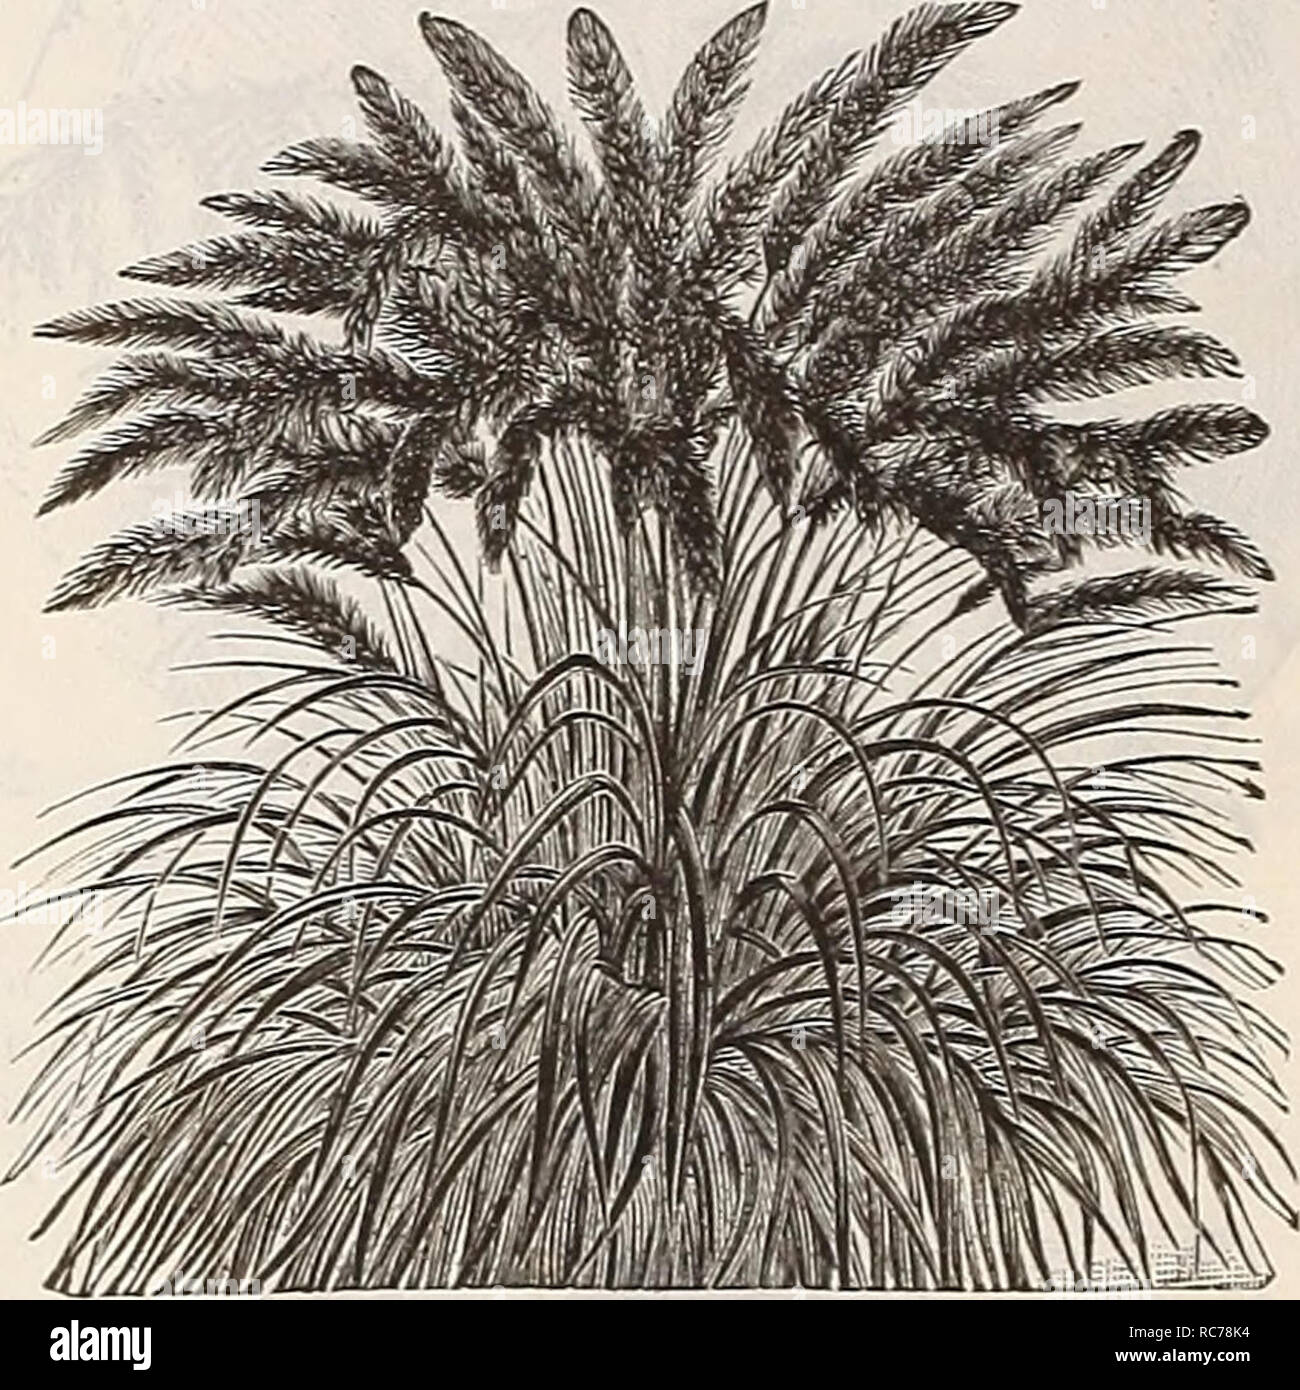 . Dreer's garden calendar : 1900. Seeds Catalogs; Nursery stock Catalogs; Gardening Equipment and supplies Catalogs; Flowers Seeds Catalogs; Vegetables Seeds Catalogs; Fruit Seeds Catalogs. PER PKT. 2641 B r i z a Maxima {Quaking Grass). In great demand for ornamental work and grass bouquets.. 5 2642 B r o ui u s Brizaefor- mis. A graceful variety, , with drooping panicles; per- ennial 5 2644 Coix liachrymae {Job'sTears). Broad, corn- like leaves and hard, shin- ing, pearly seeds; annual. Per oz.. 15 cts 5 2646 Erianthus Raven- use. Perennial ; exquisite plumes resembling the Pam- pas. Fine fo Stock Photo